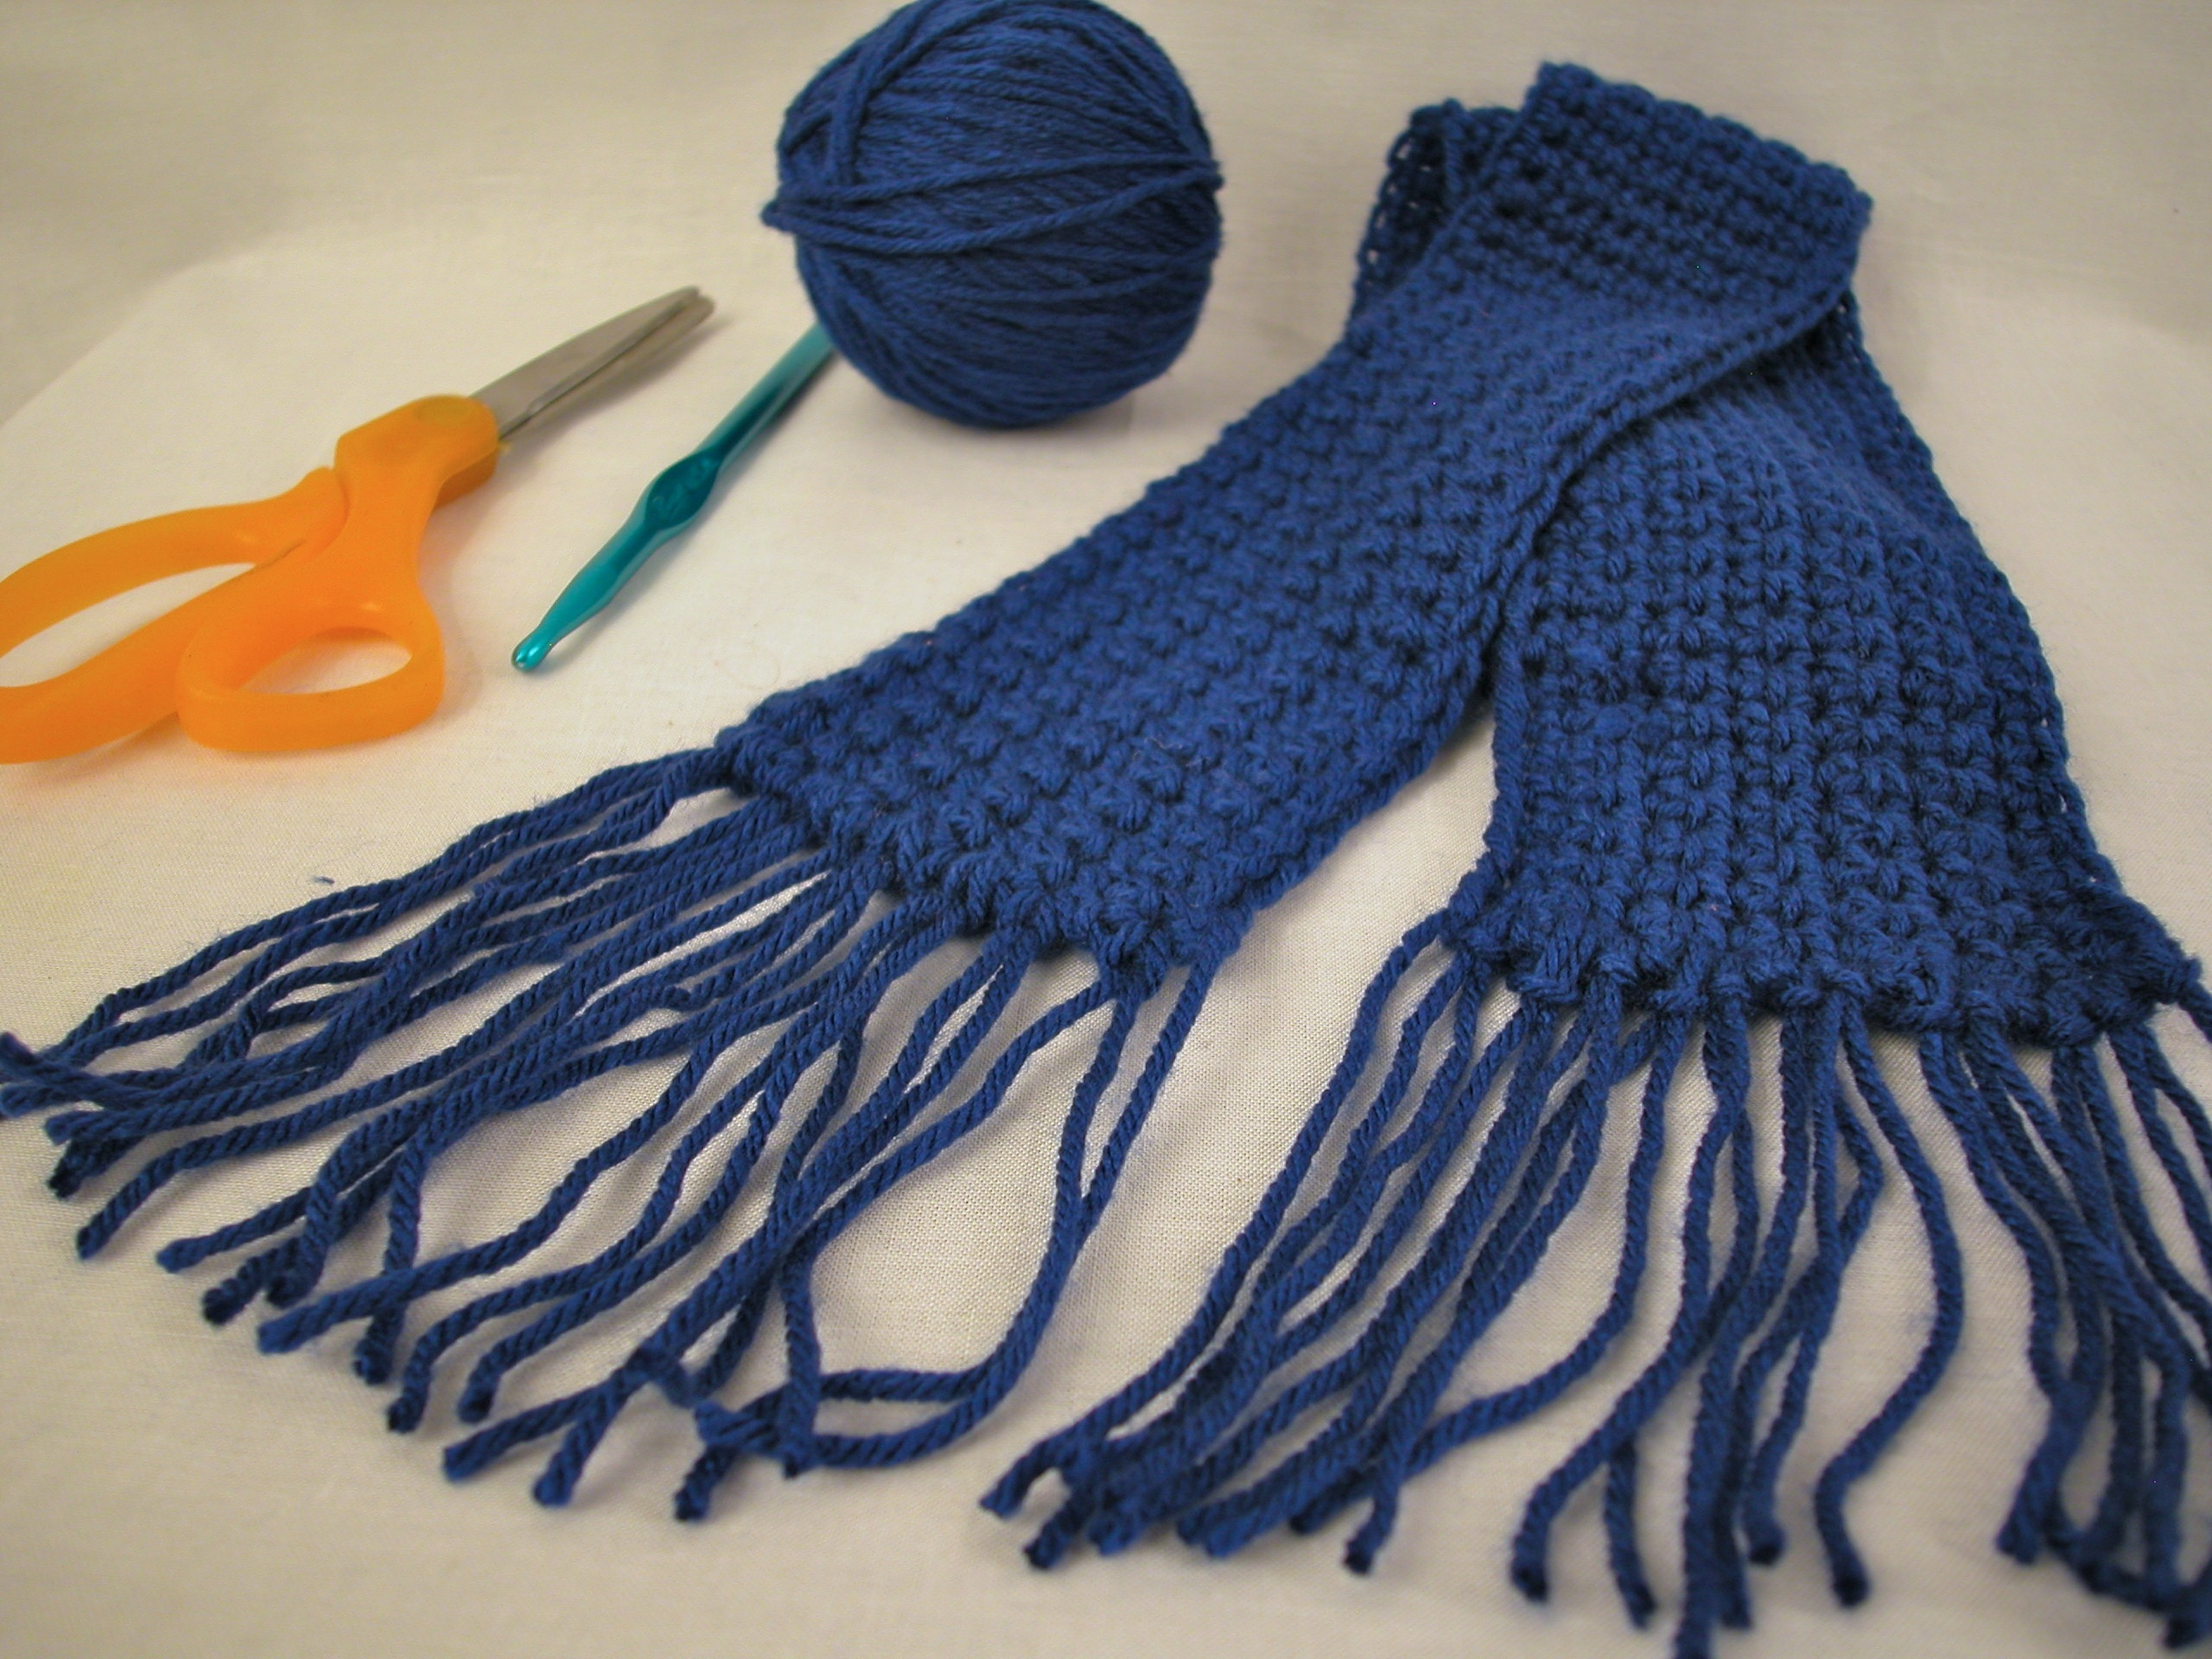 Simple Crochet Scarf Patterns How To Crochet A Scarf Using Single Crochet 5 Steps